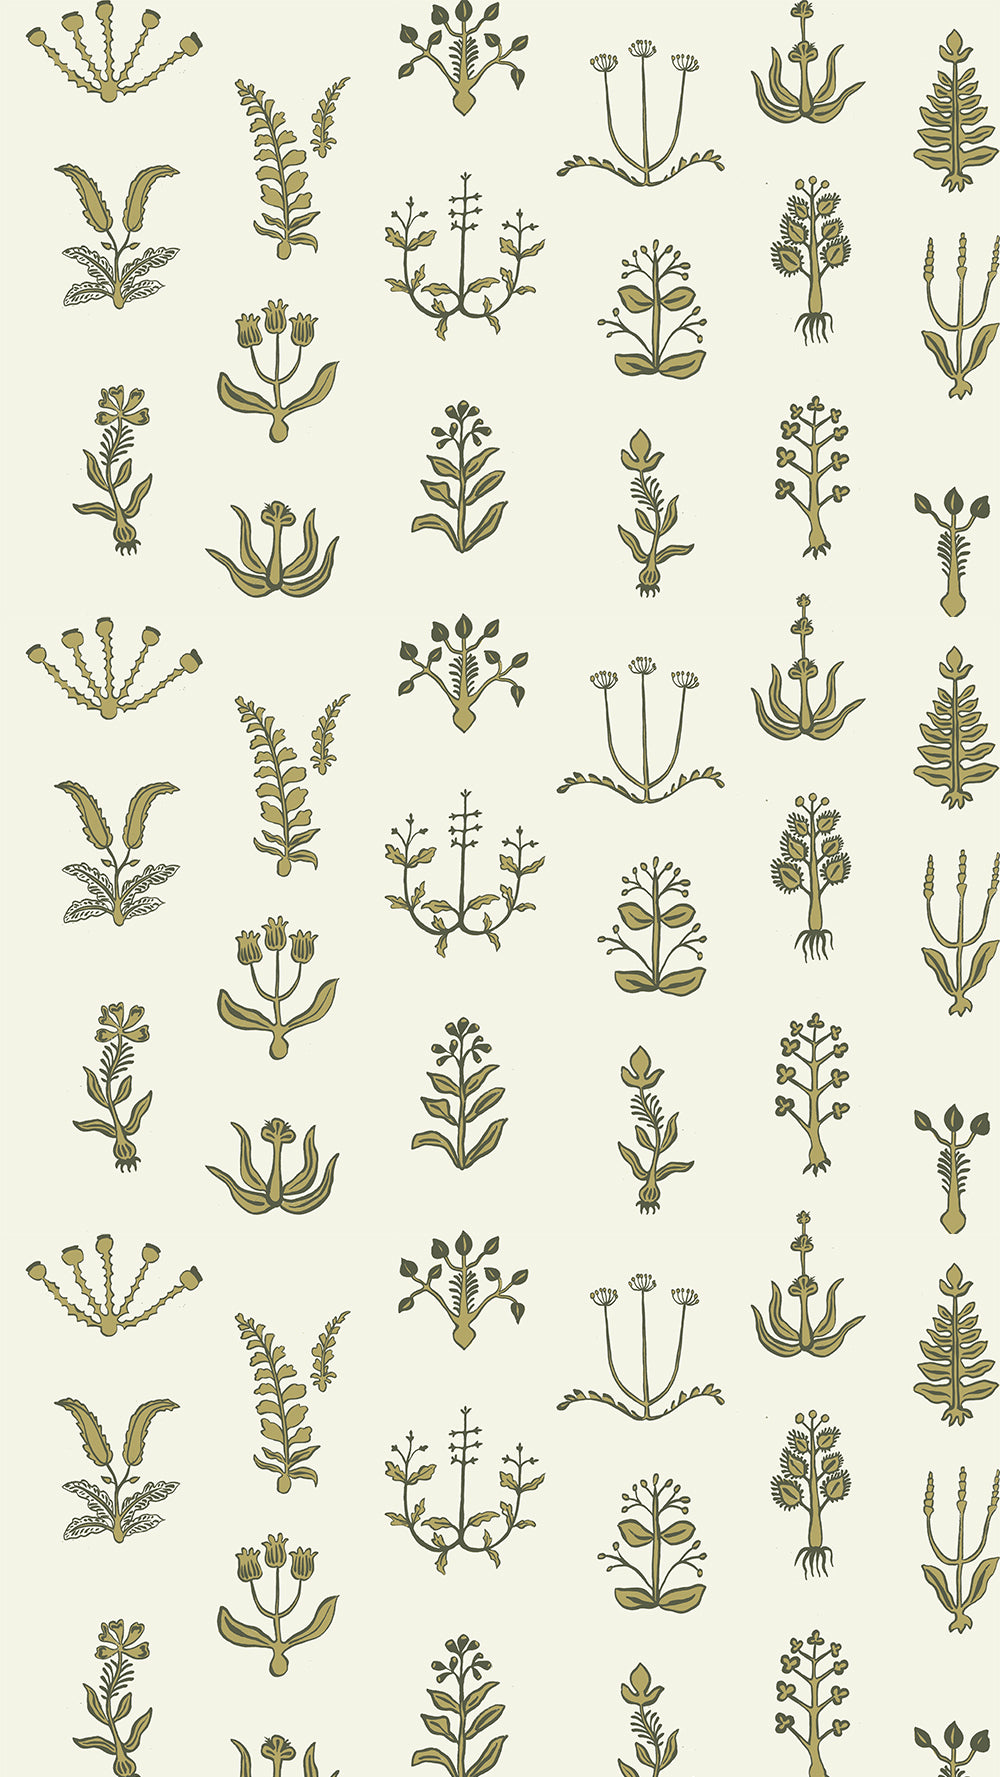 FLO-003-026-044-josephine-muncsey-wallpaper-chaingate -green-meadow-ringhill-white-floral-spots-wallpaper-block-printed-botanical-pattern-country-style-floral